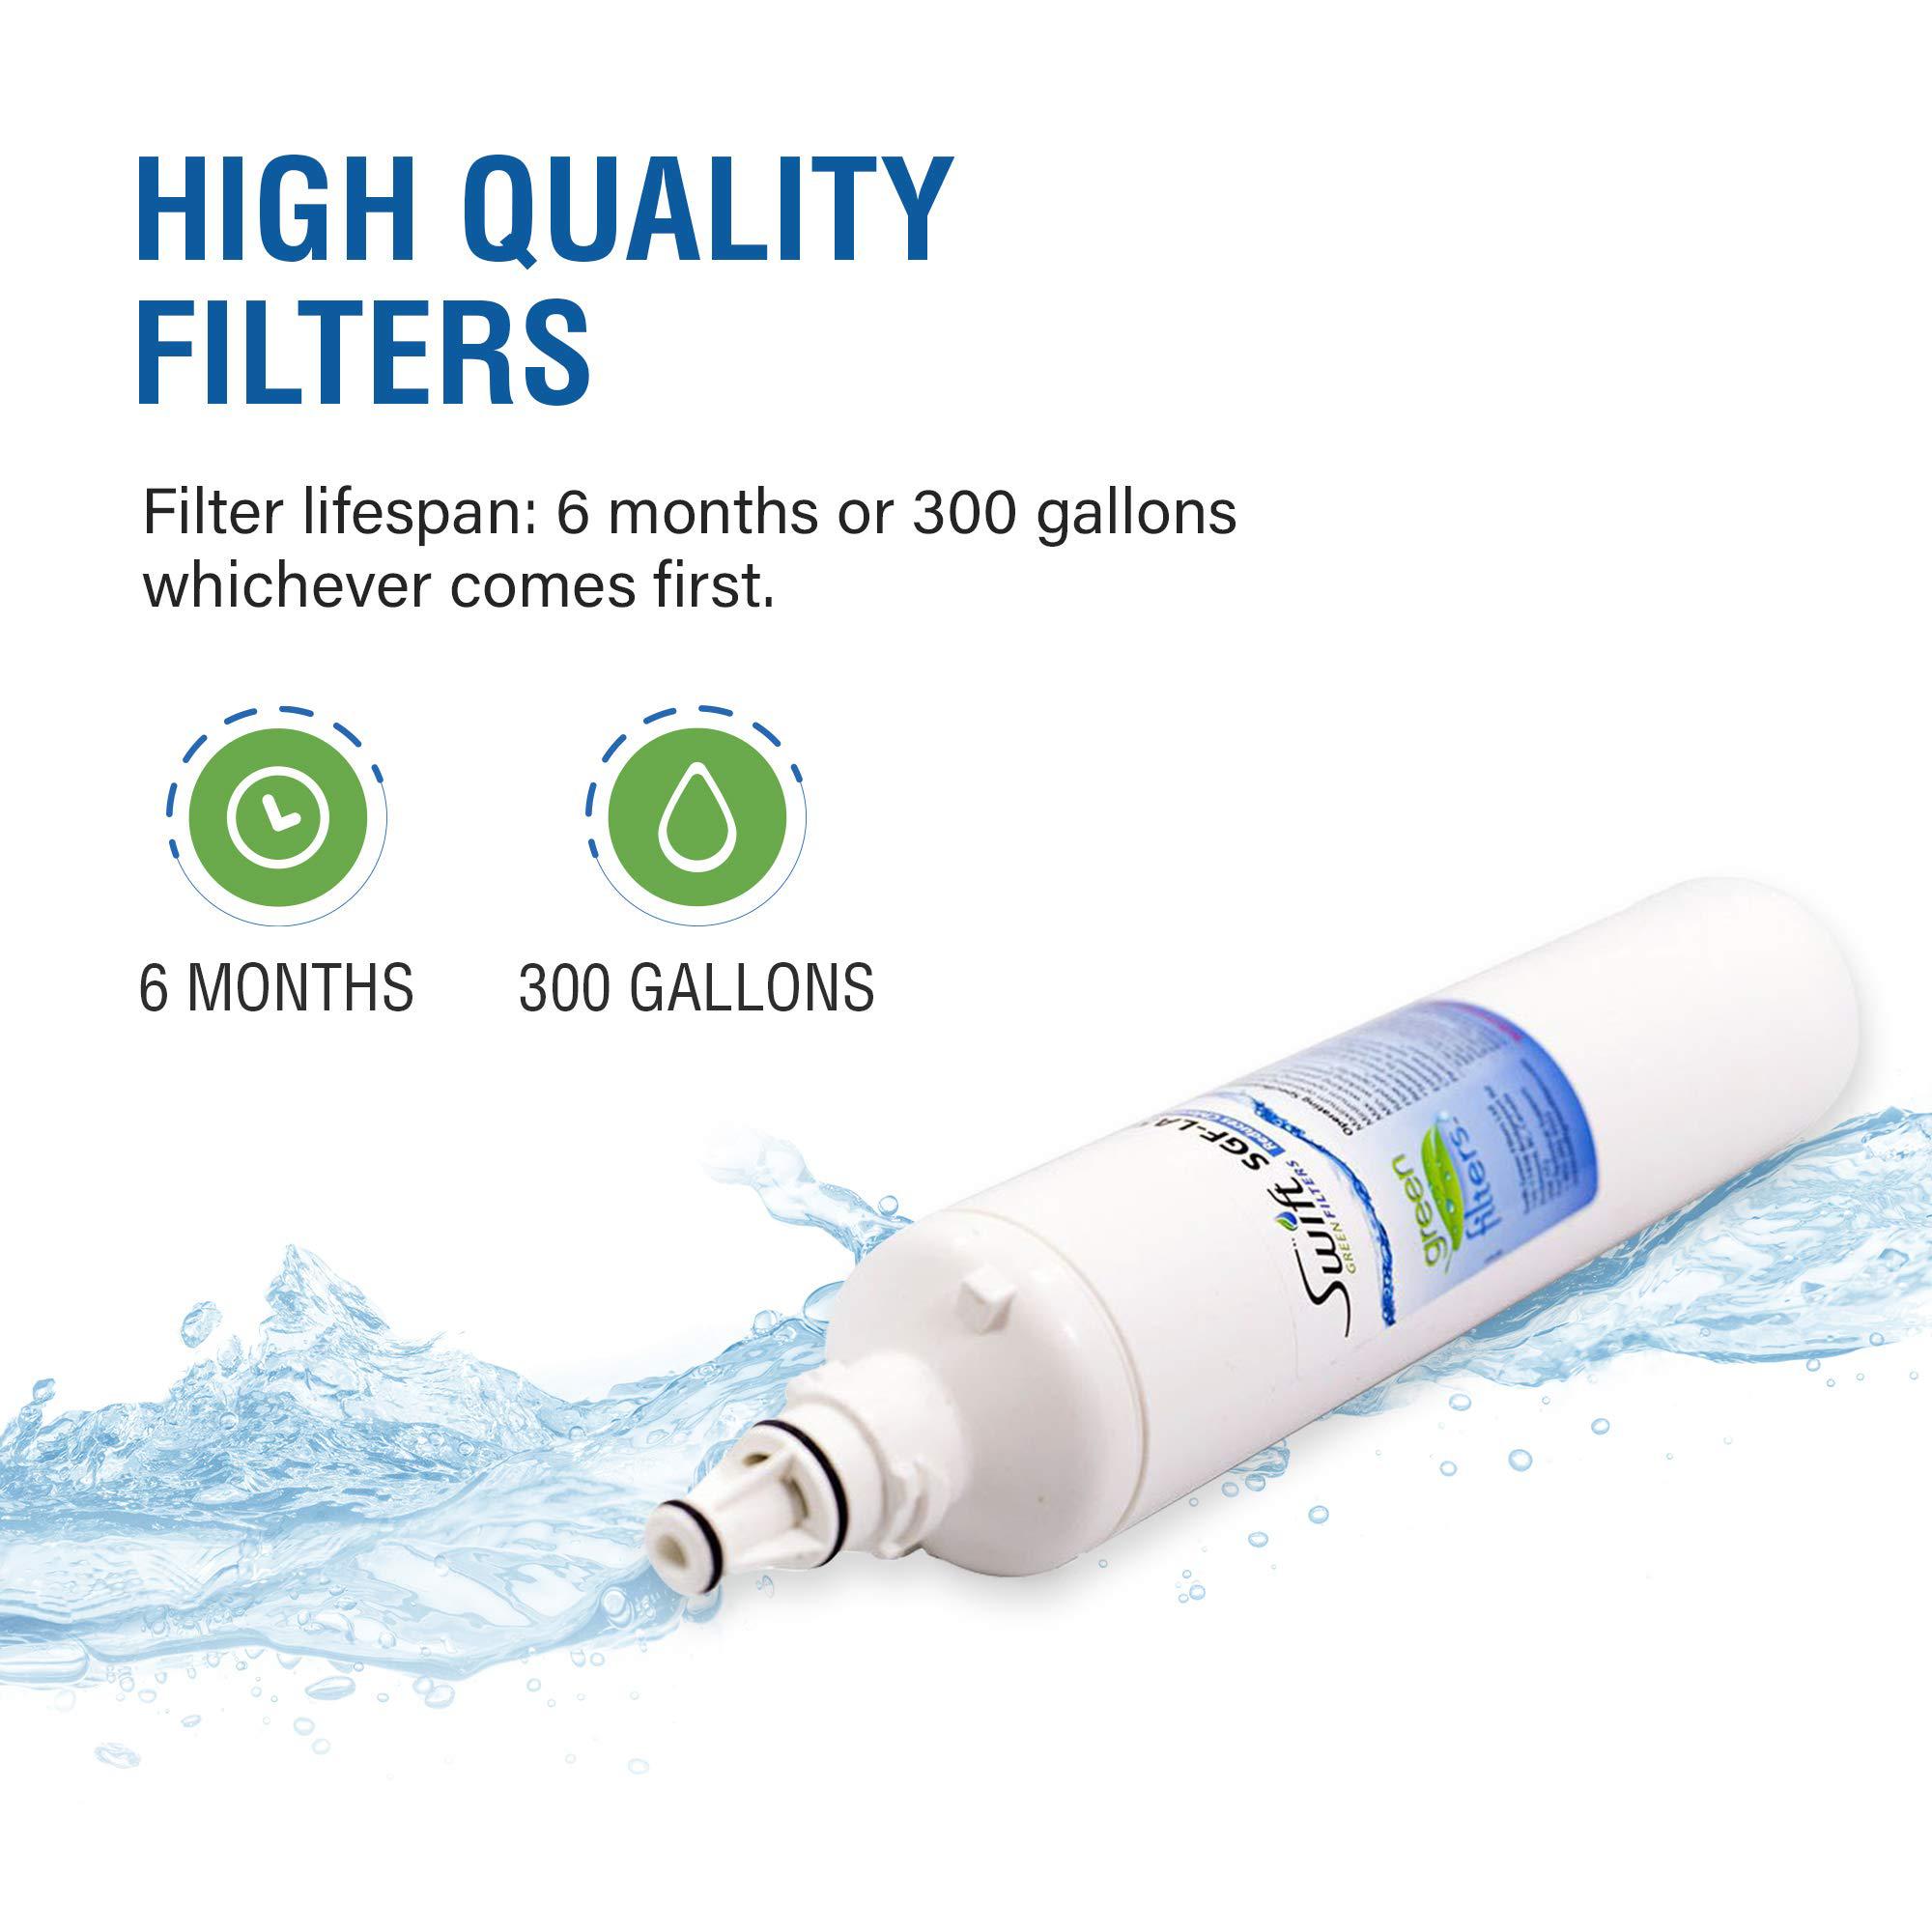 swift green filters sgf-la50 compatible refrigerator water filter for lt600p, 5231ja2006a, 46-9990,eff-6003a, eff-6004a (3 pa